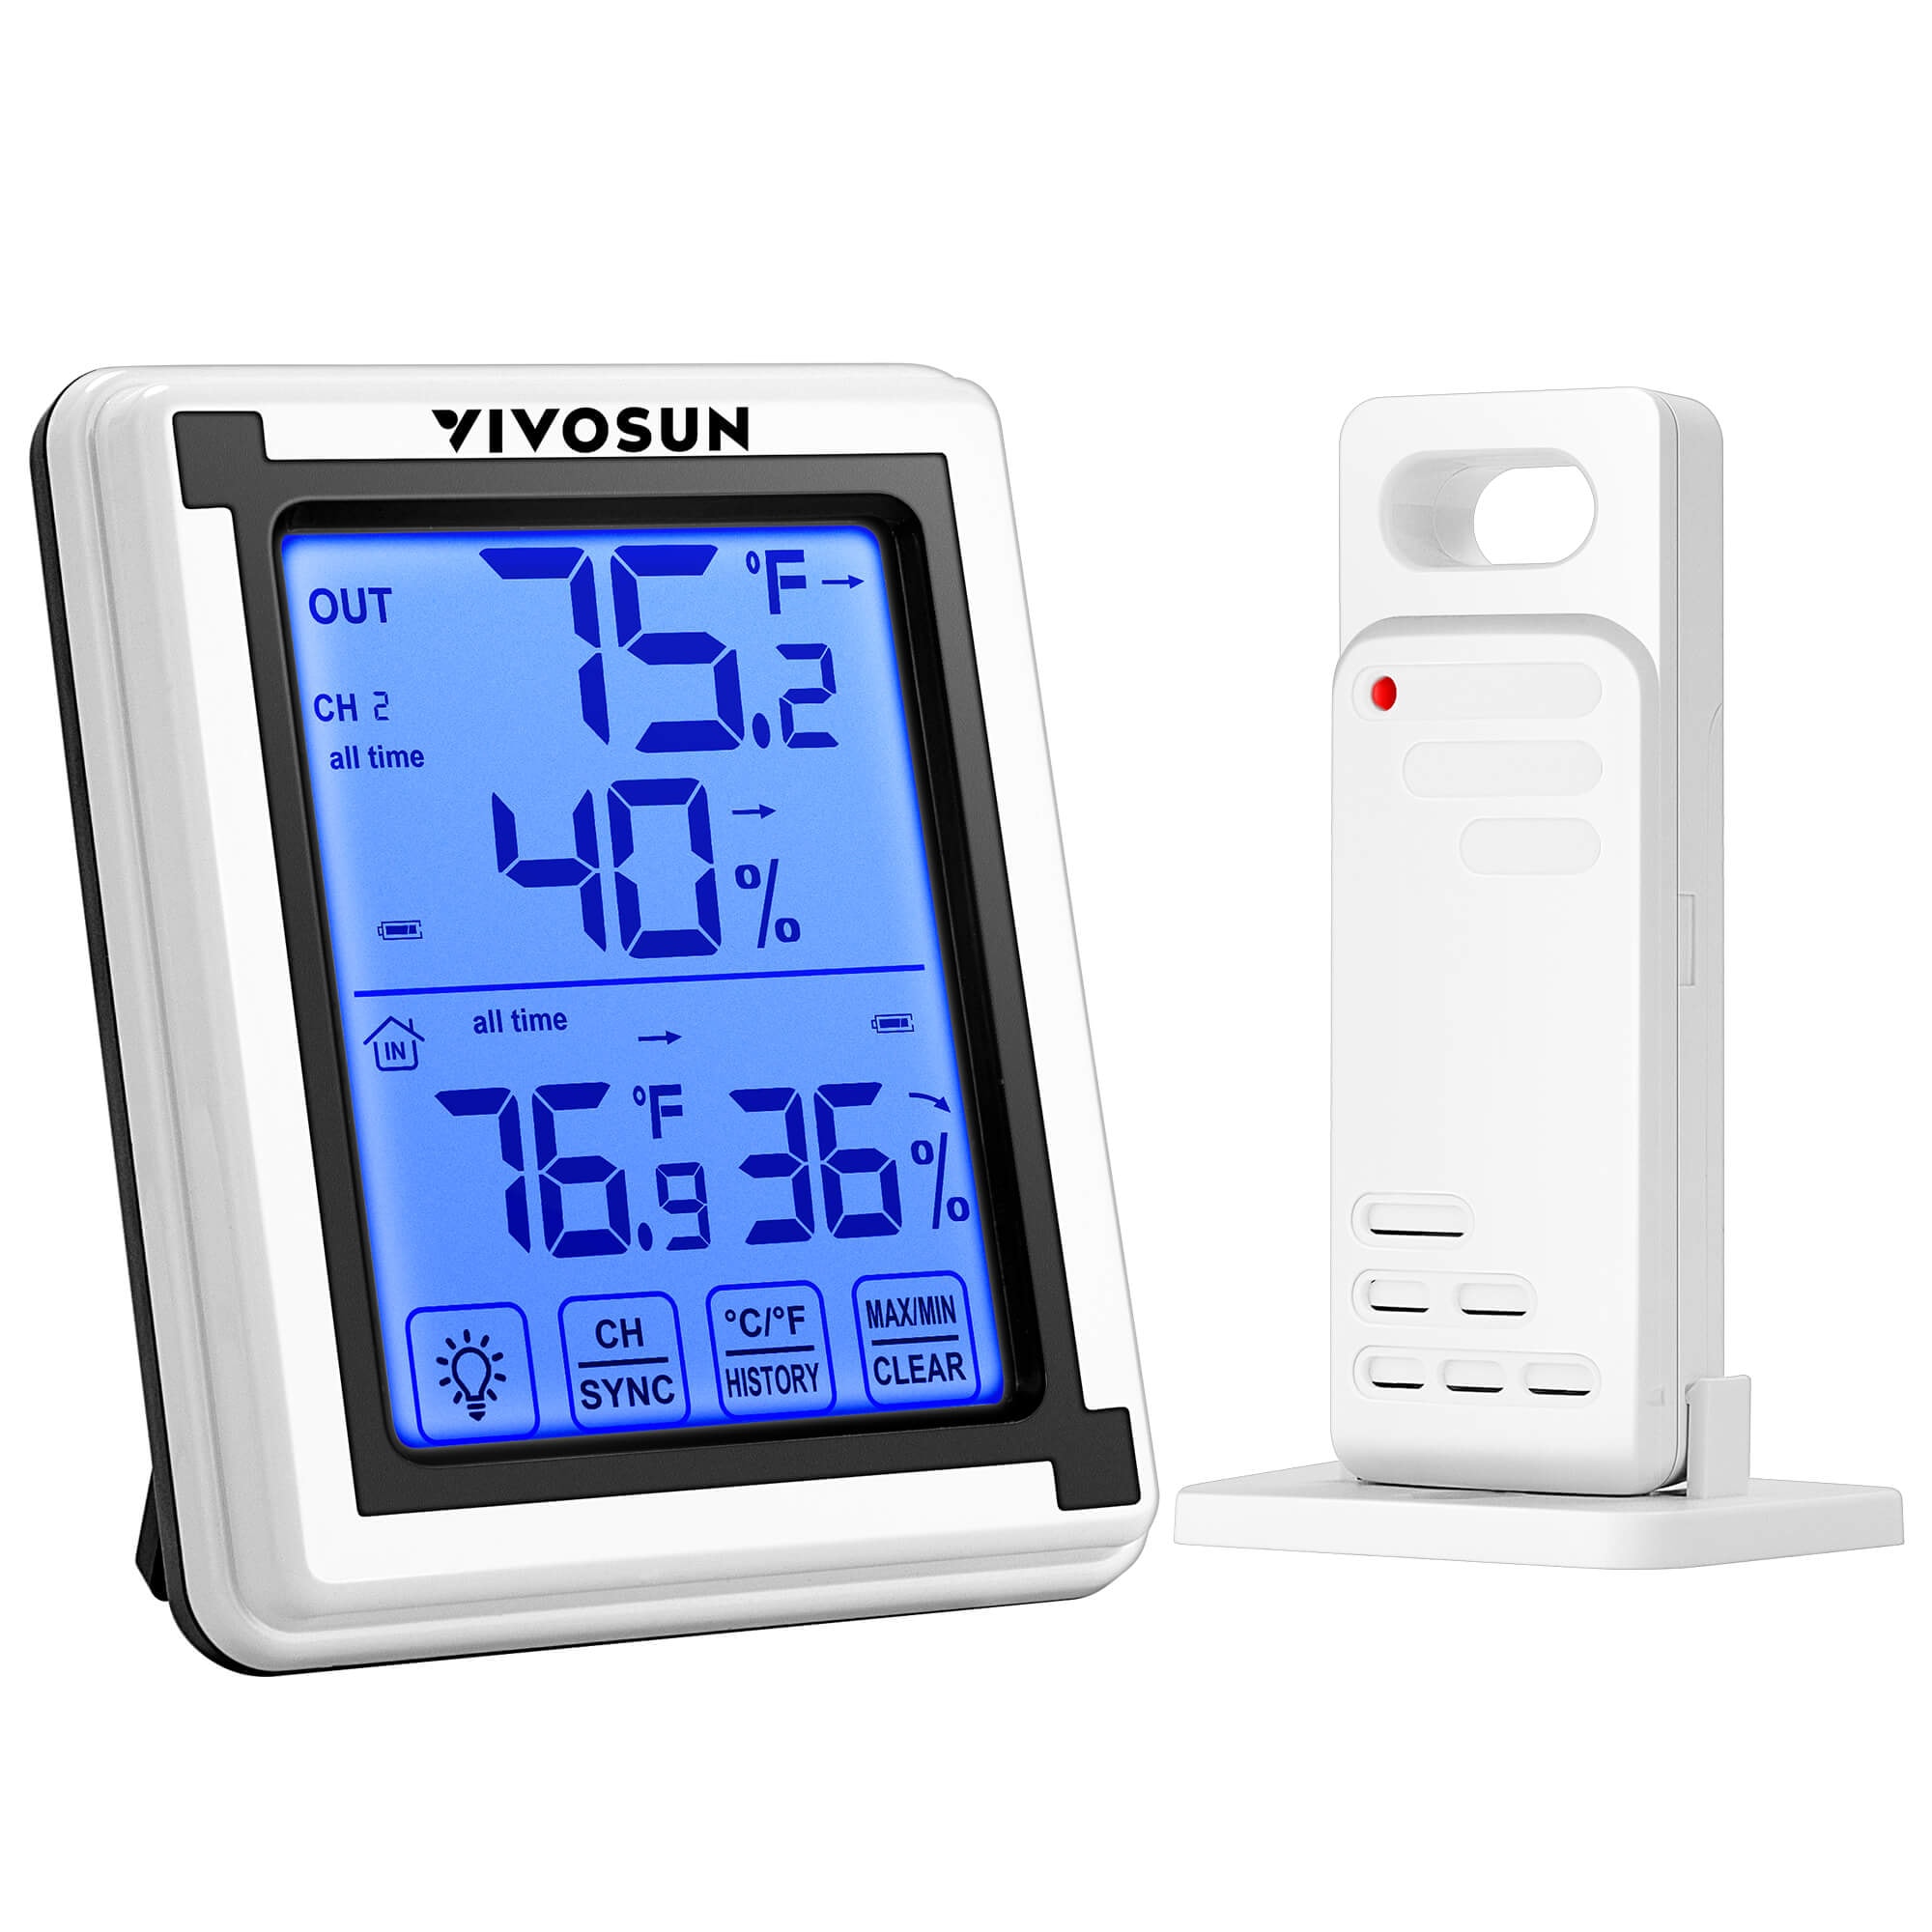 Ecowitt Wh0298_c Solar Pool Thermometer & Hygrometer - Remote